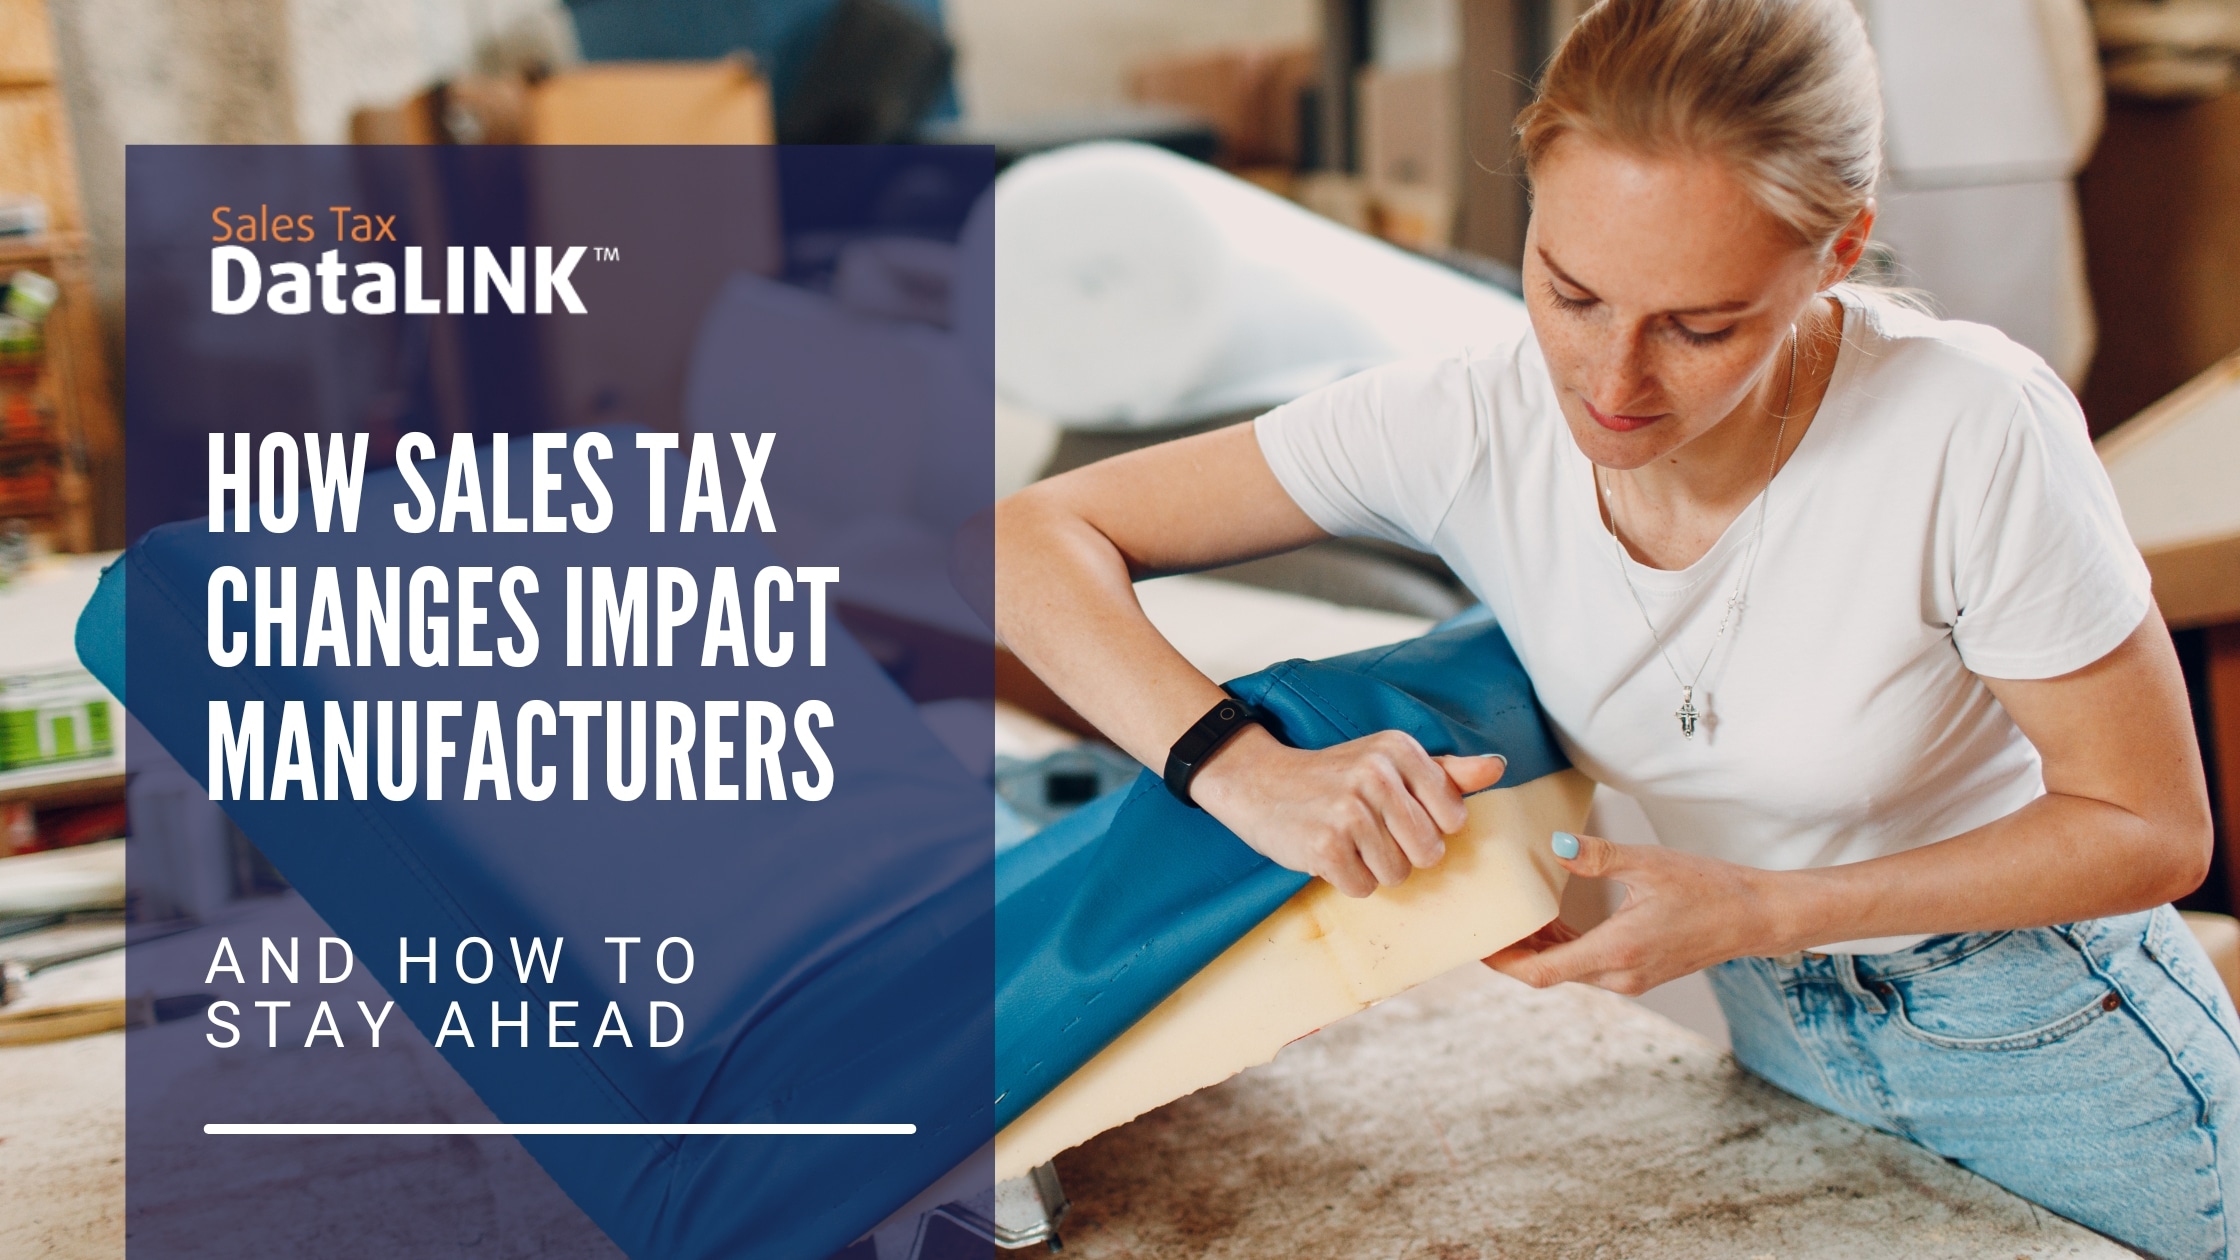 How Sales Tax Changes Impact Manufacturers (and How to Stay Ahead)